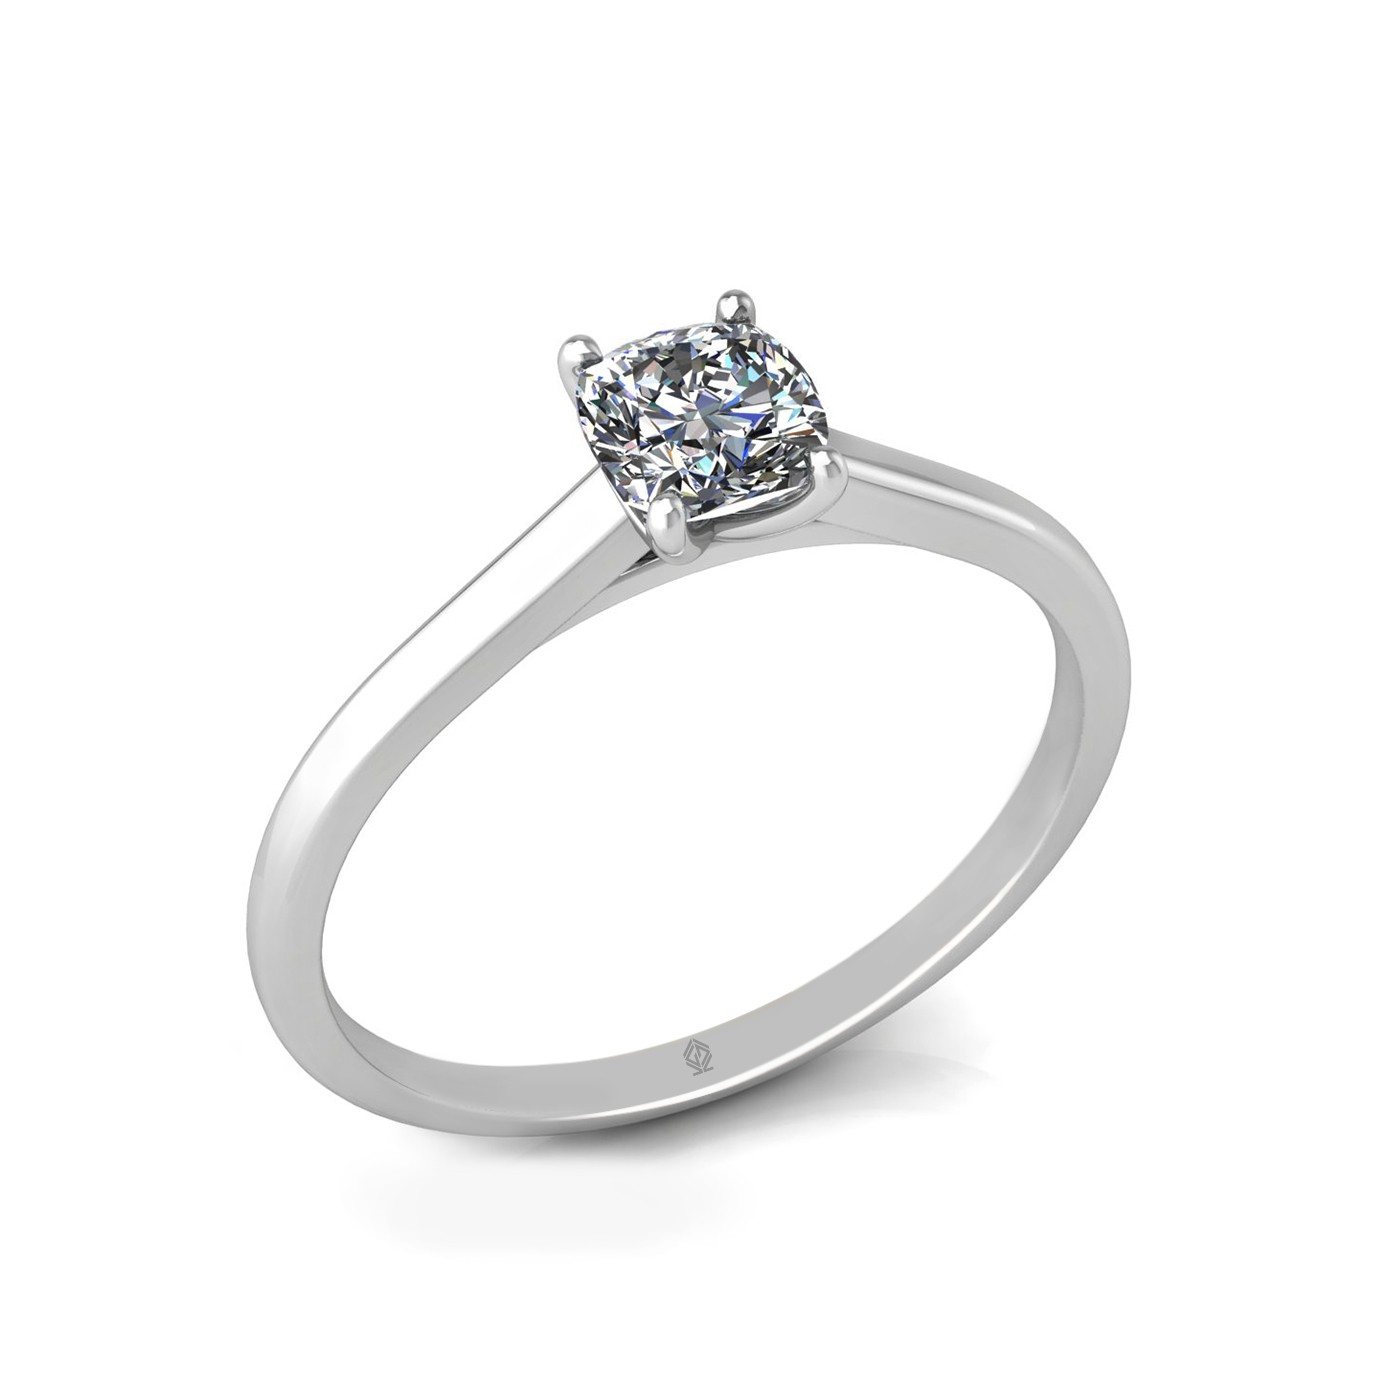 18k white gold 0,50 ct 4 prongs solitaire cushion cut diamond engagement ring with whisper thin band